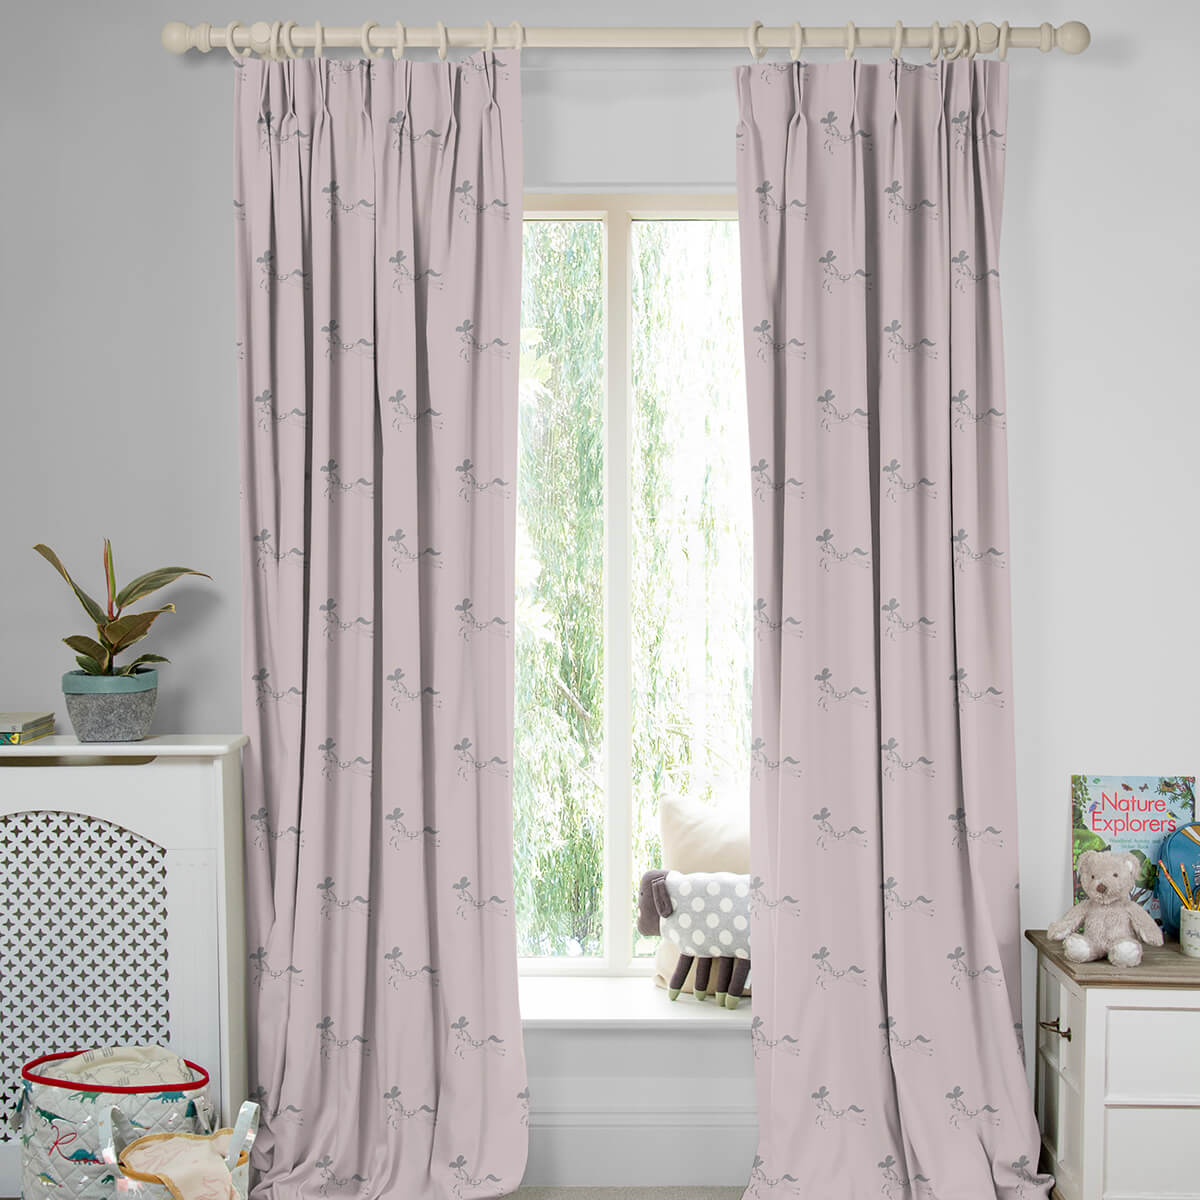 Fairground Ponies Soft Pink Made to Measure Curtains